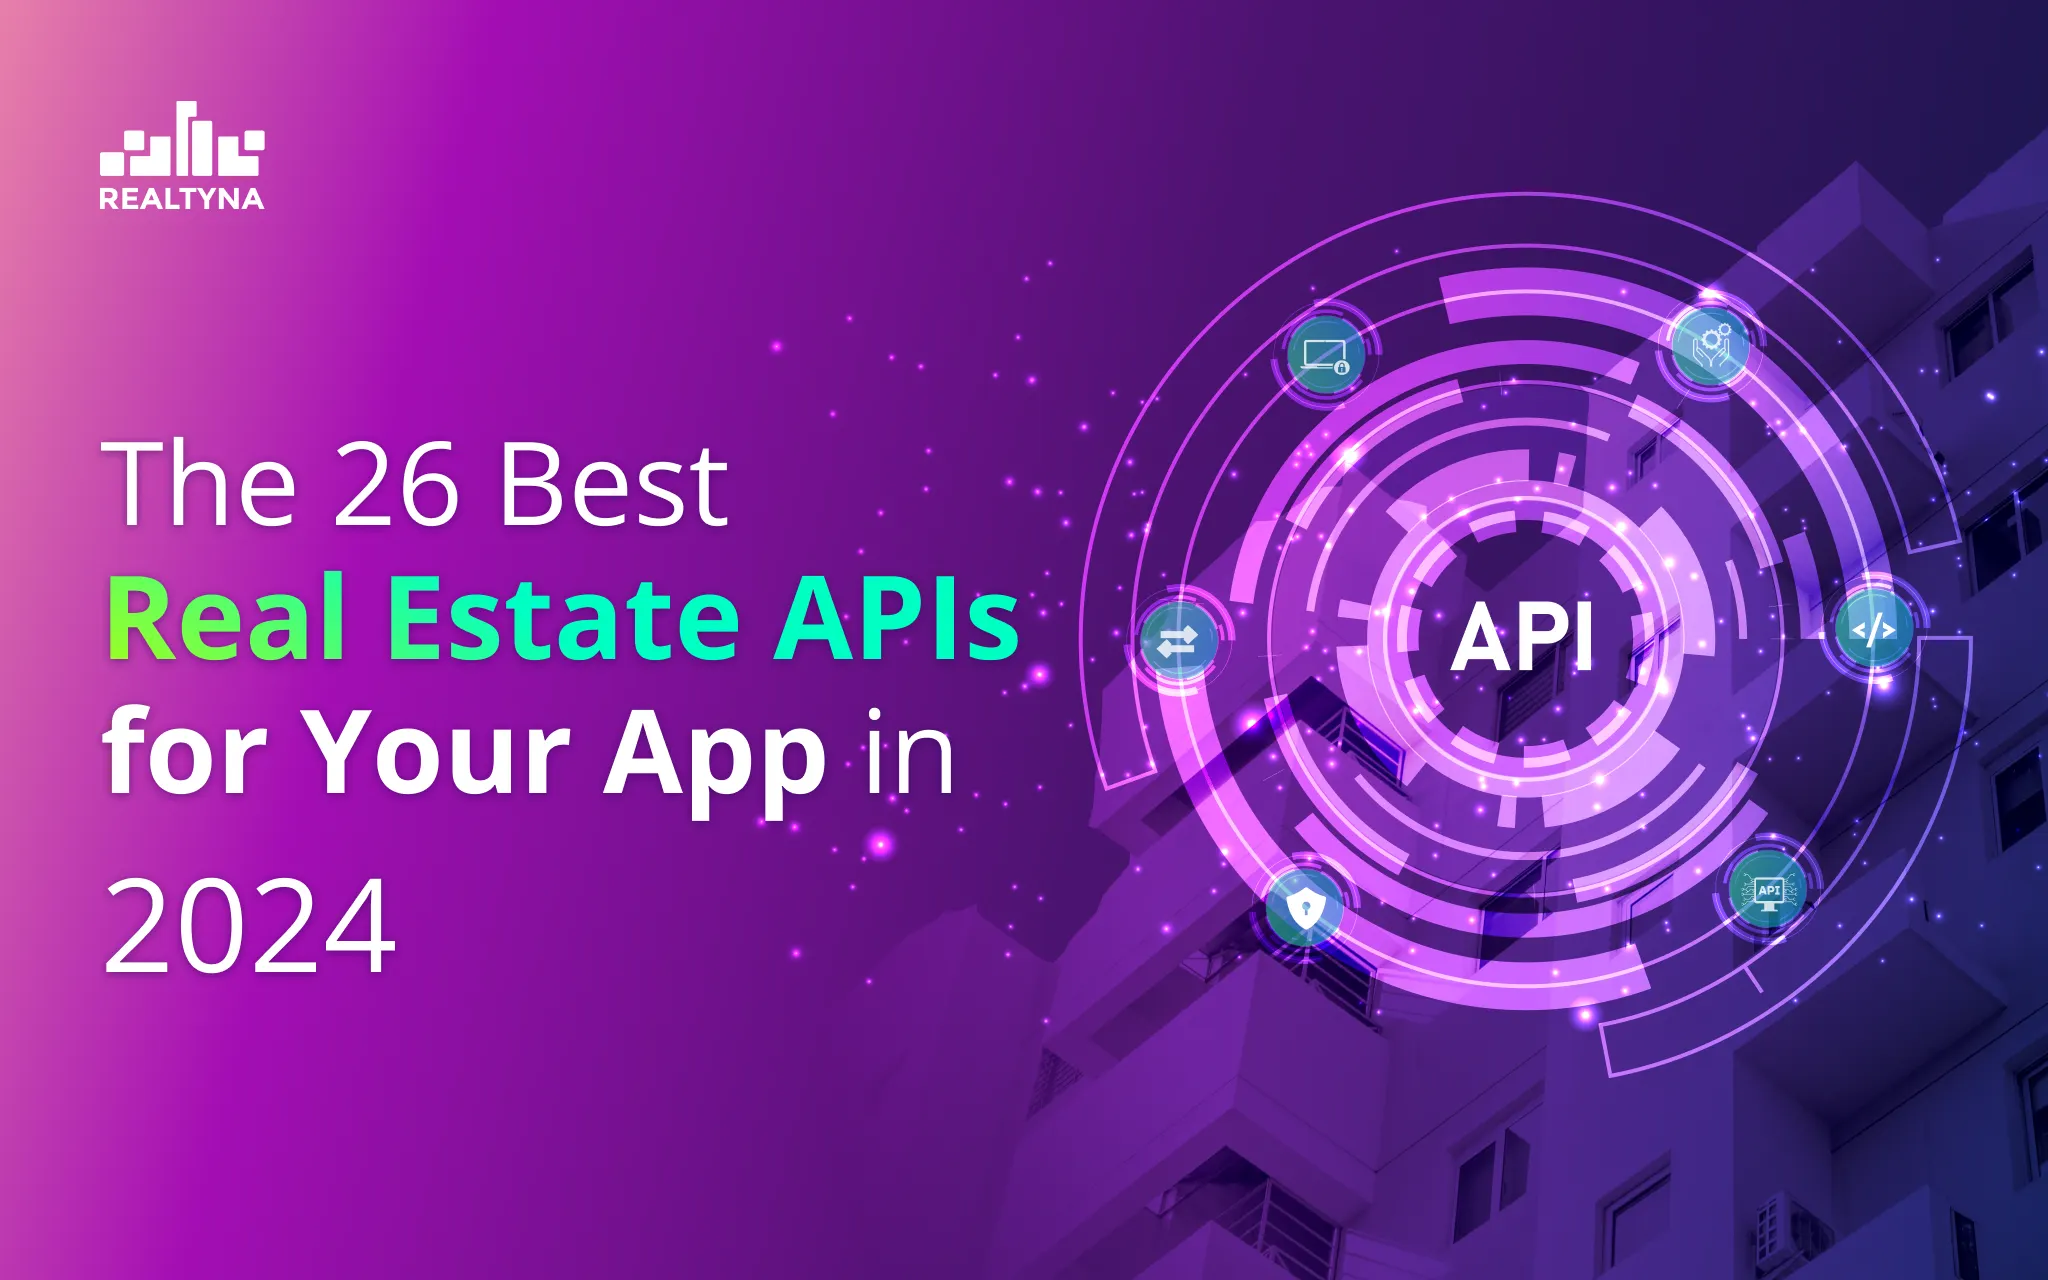 The 26 Best Real Estate APIs for Your App in 2024